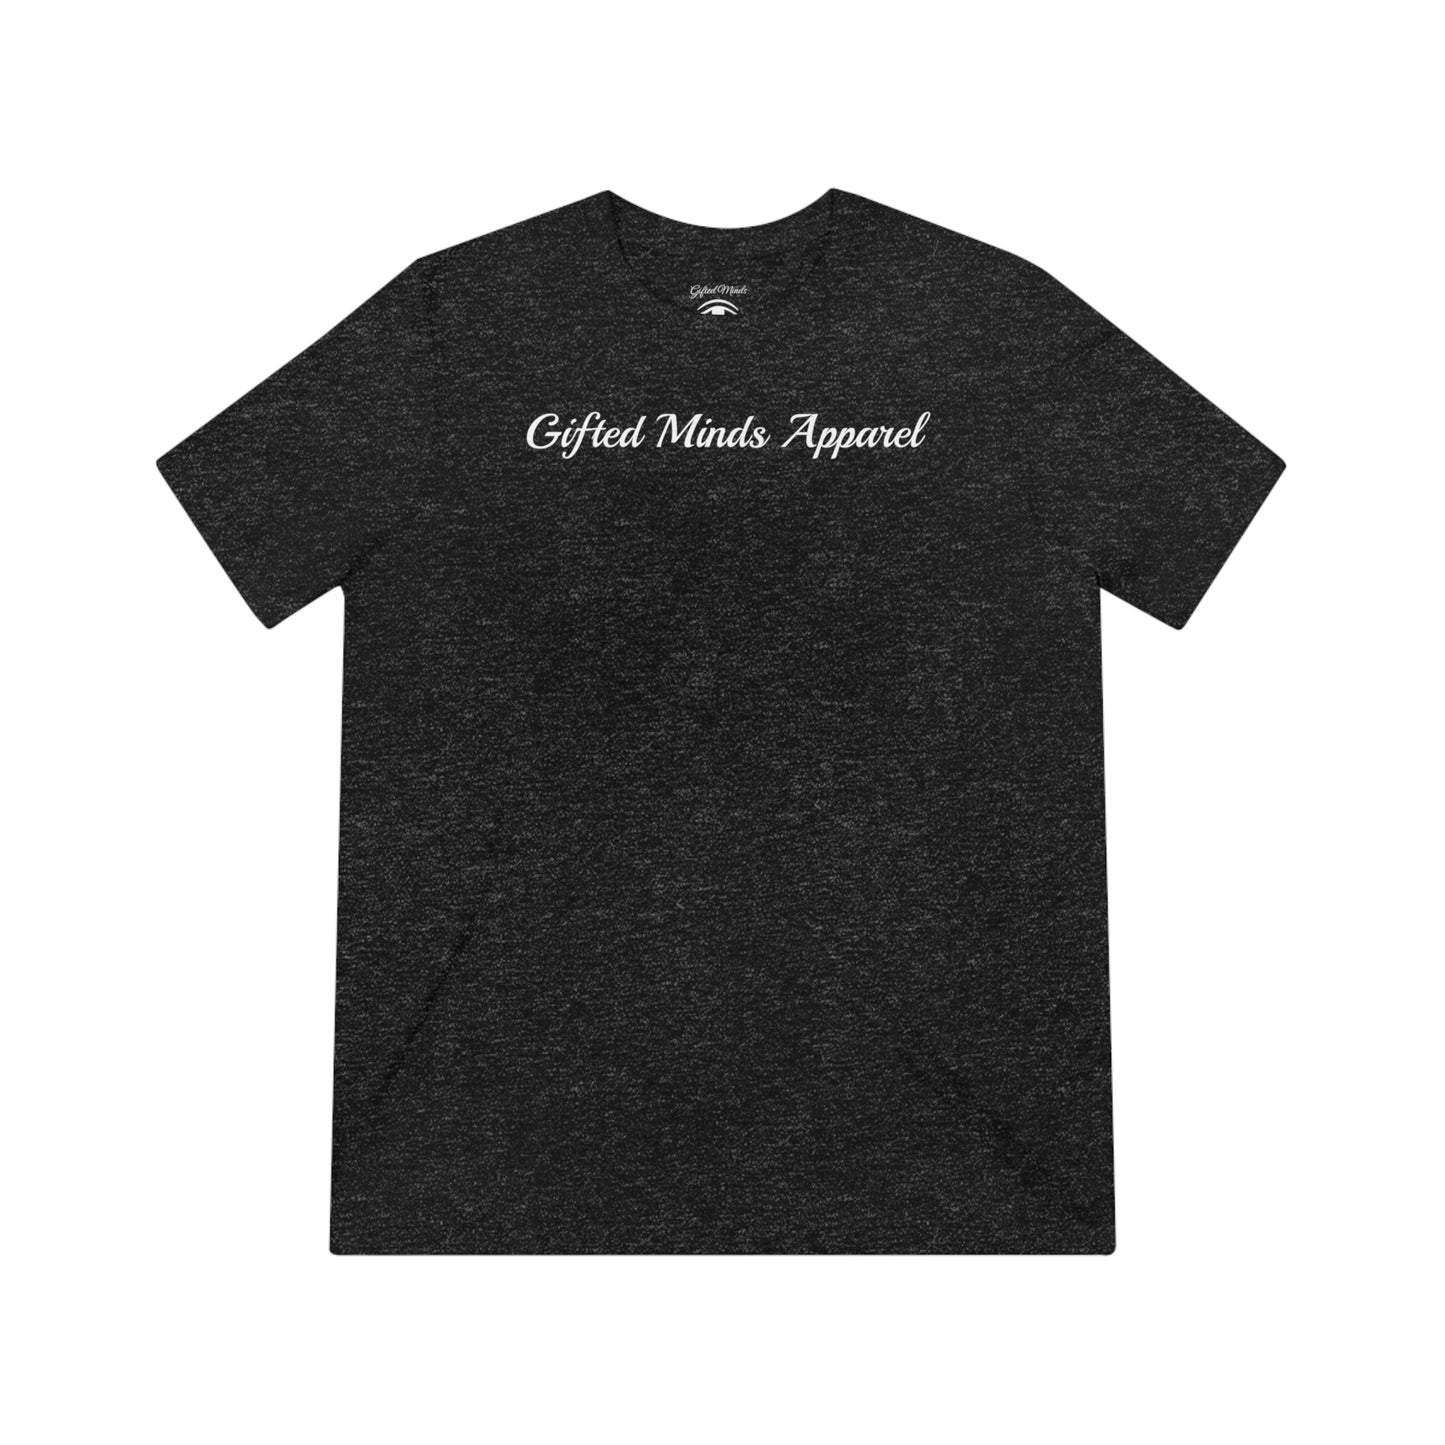 Gifted Minds Apparel Premium Triblend Tee - GFTD MNDS